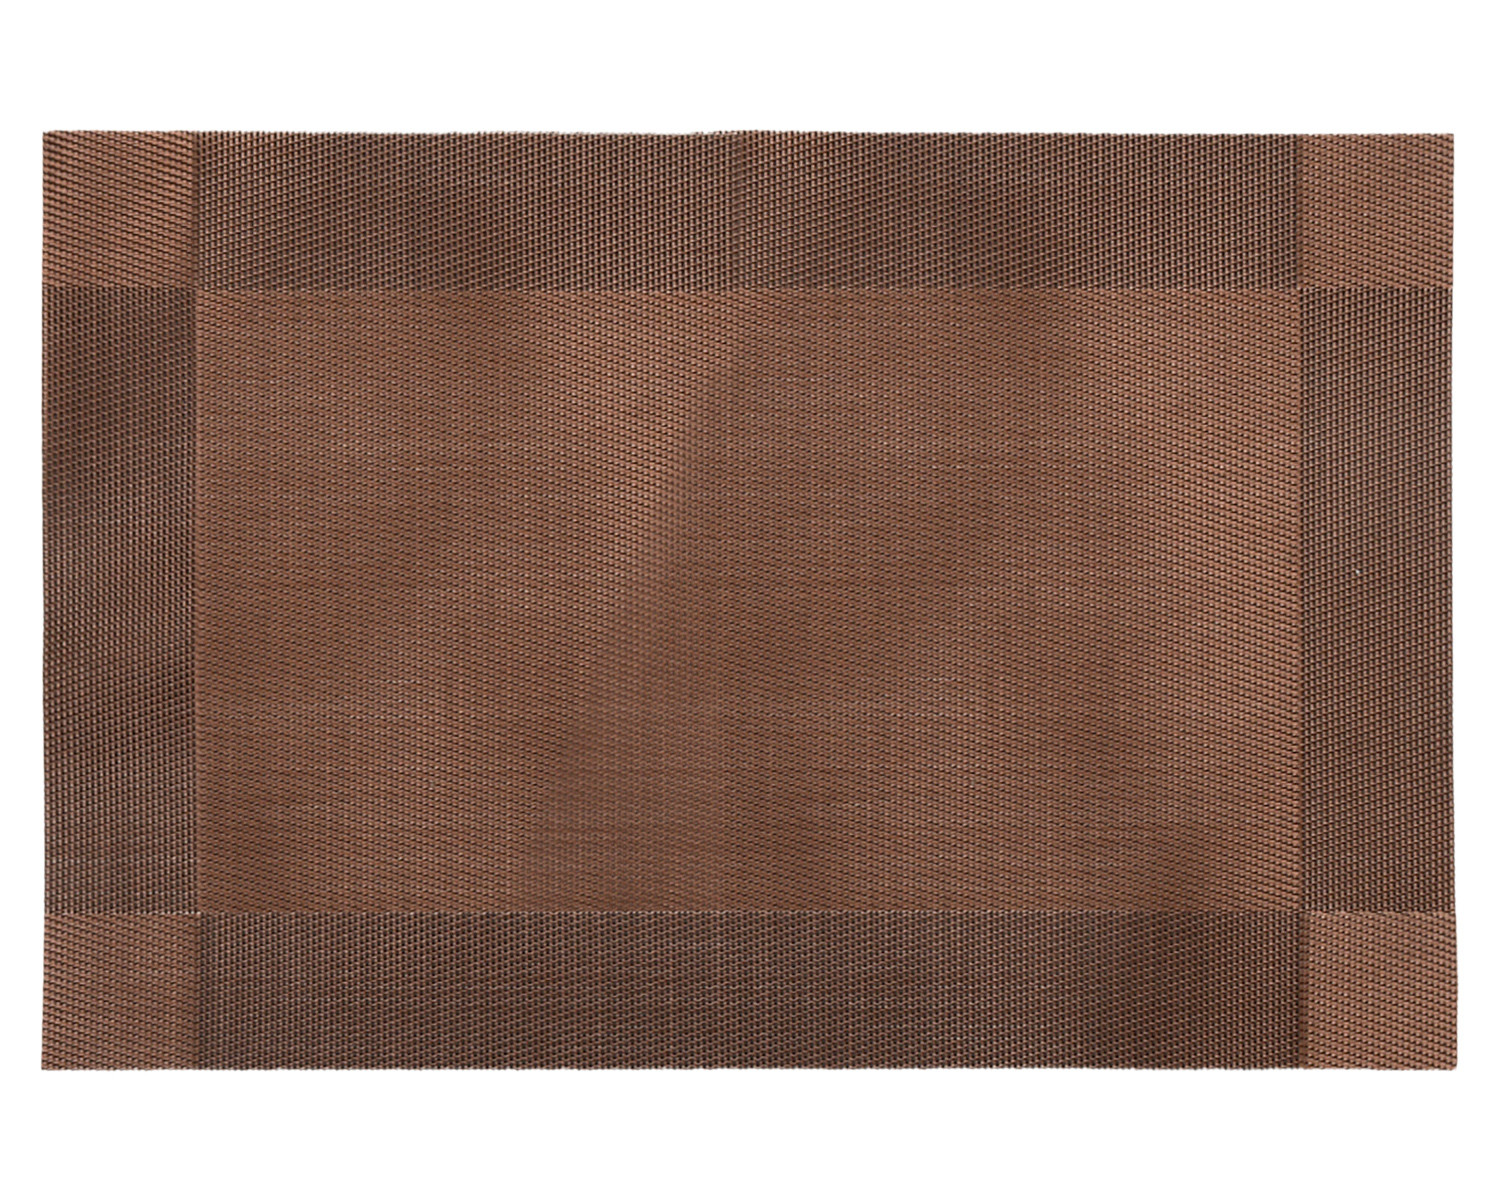 Kuber Industries Reversible Non-Slip Wipe Clean Heat Resistant PVC Placemats for Dining Table,(Brown)